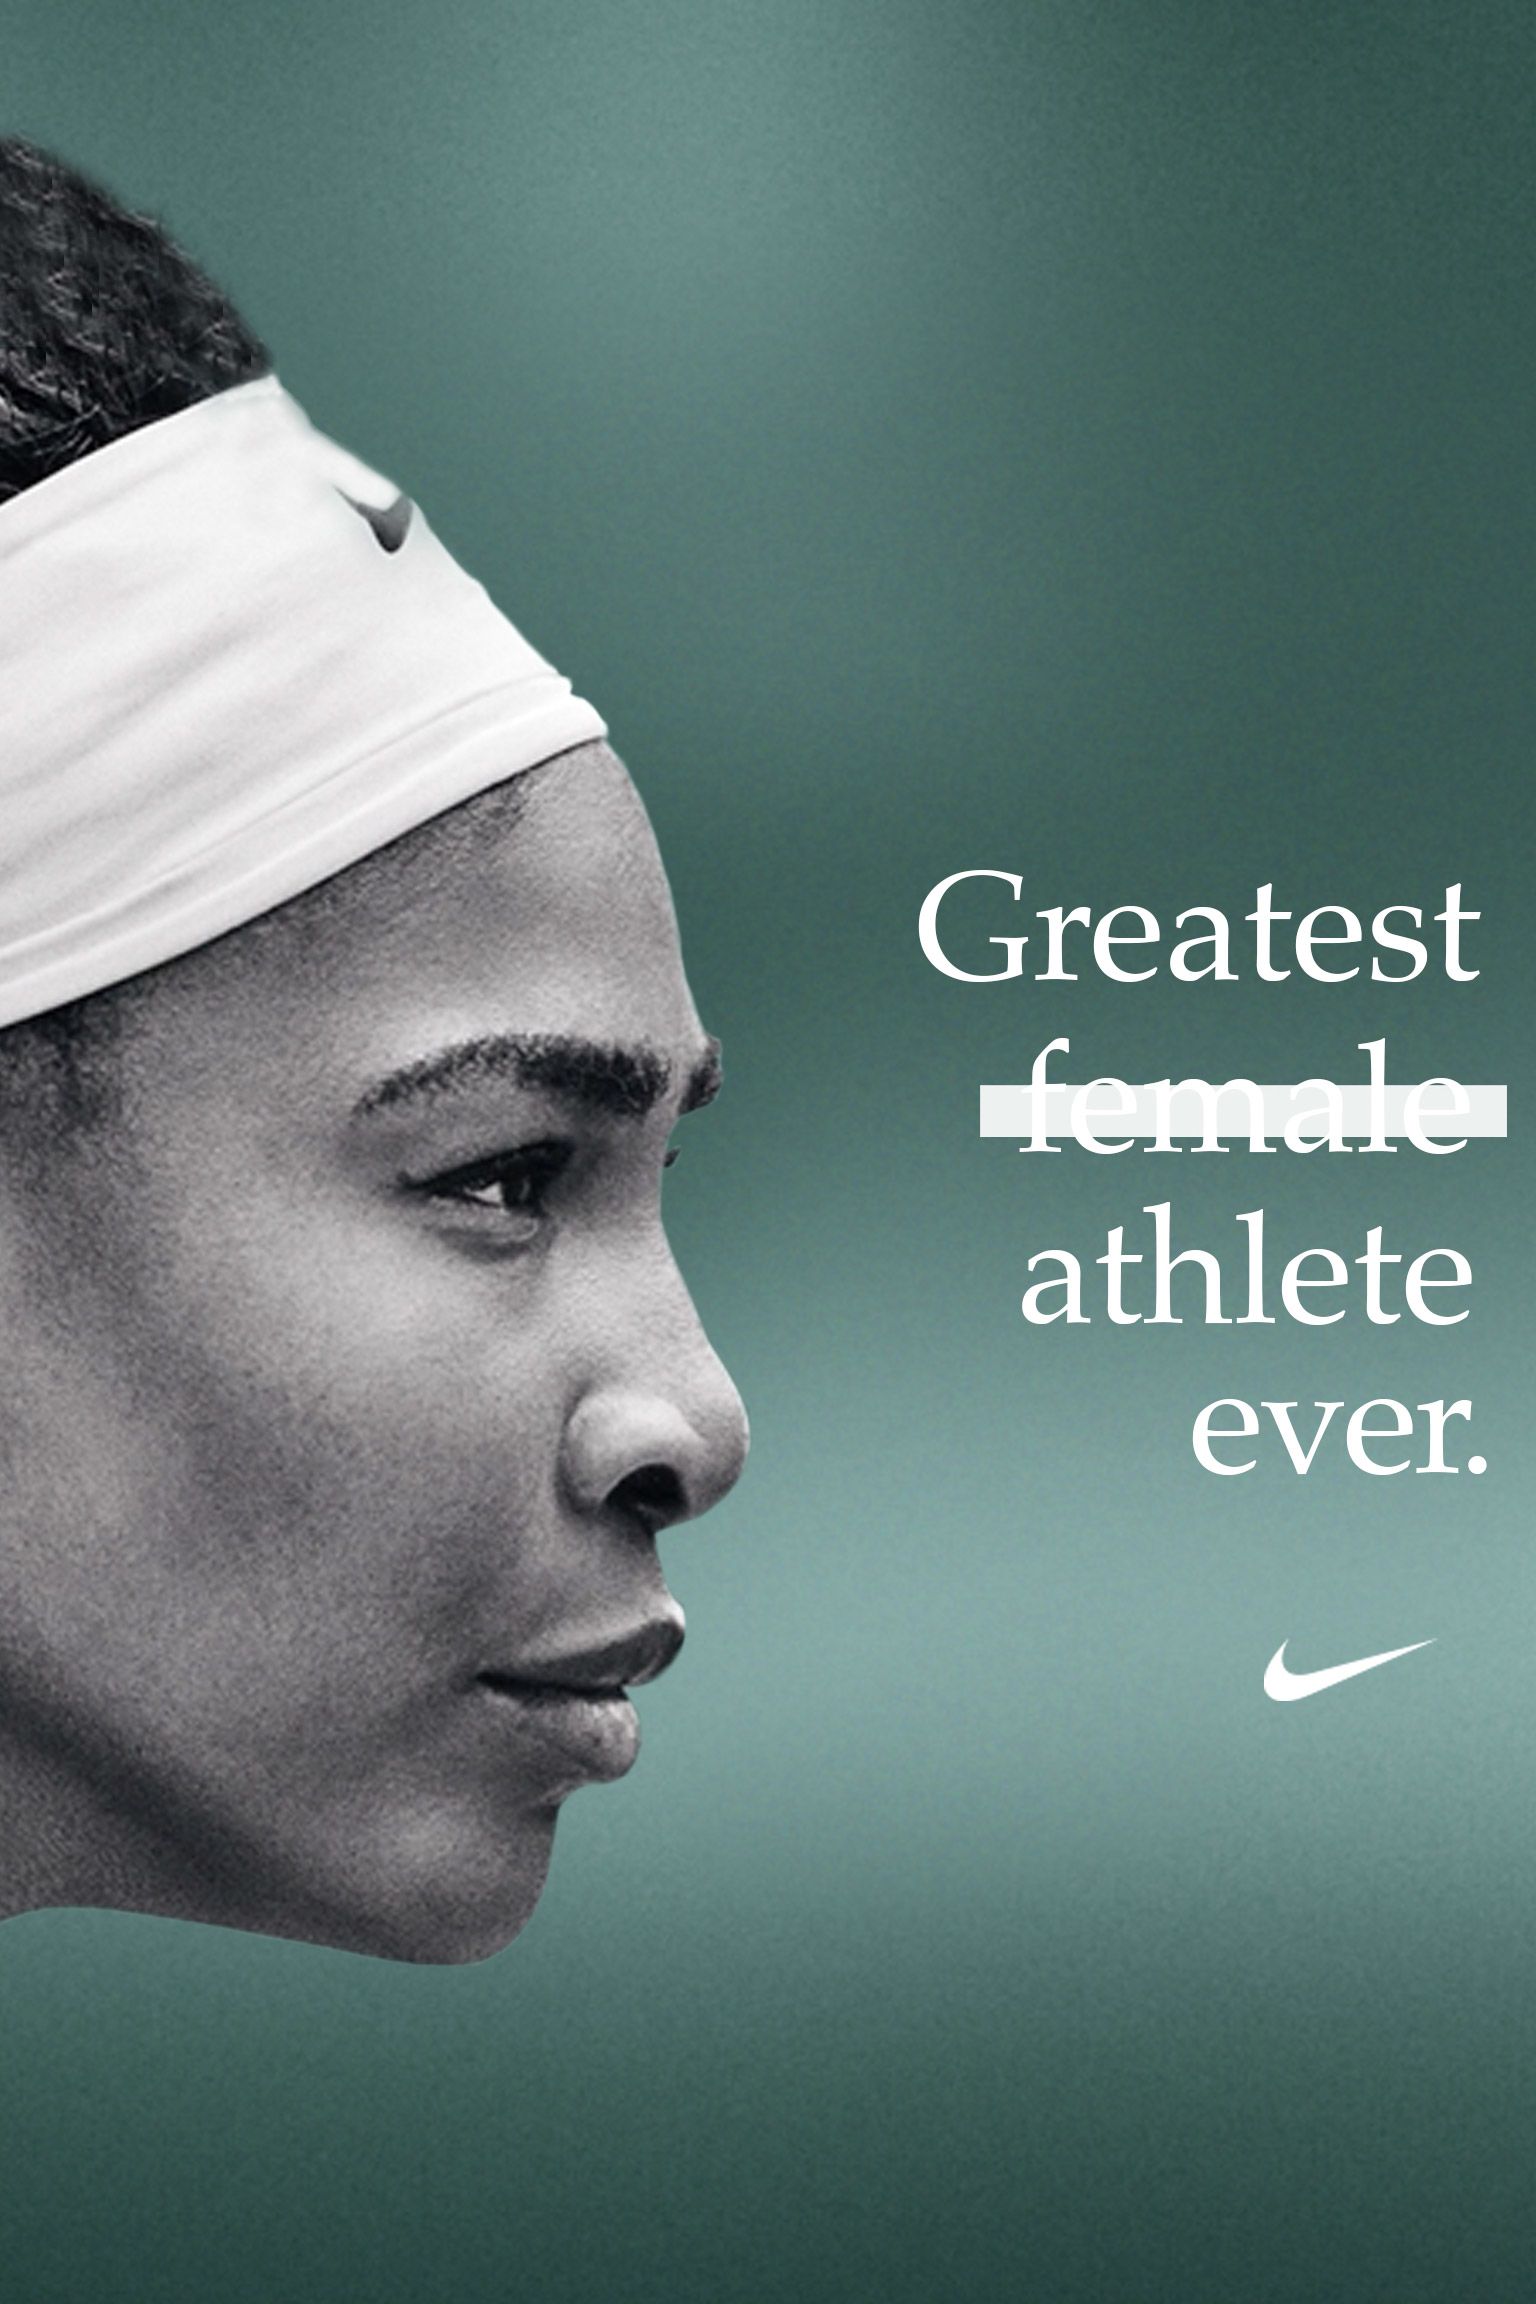 new nike commercial serena williams